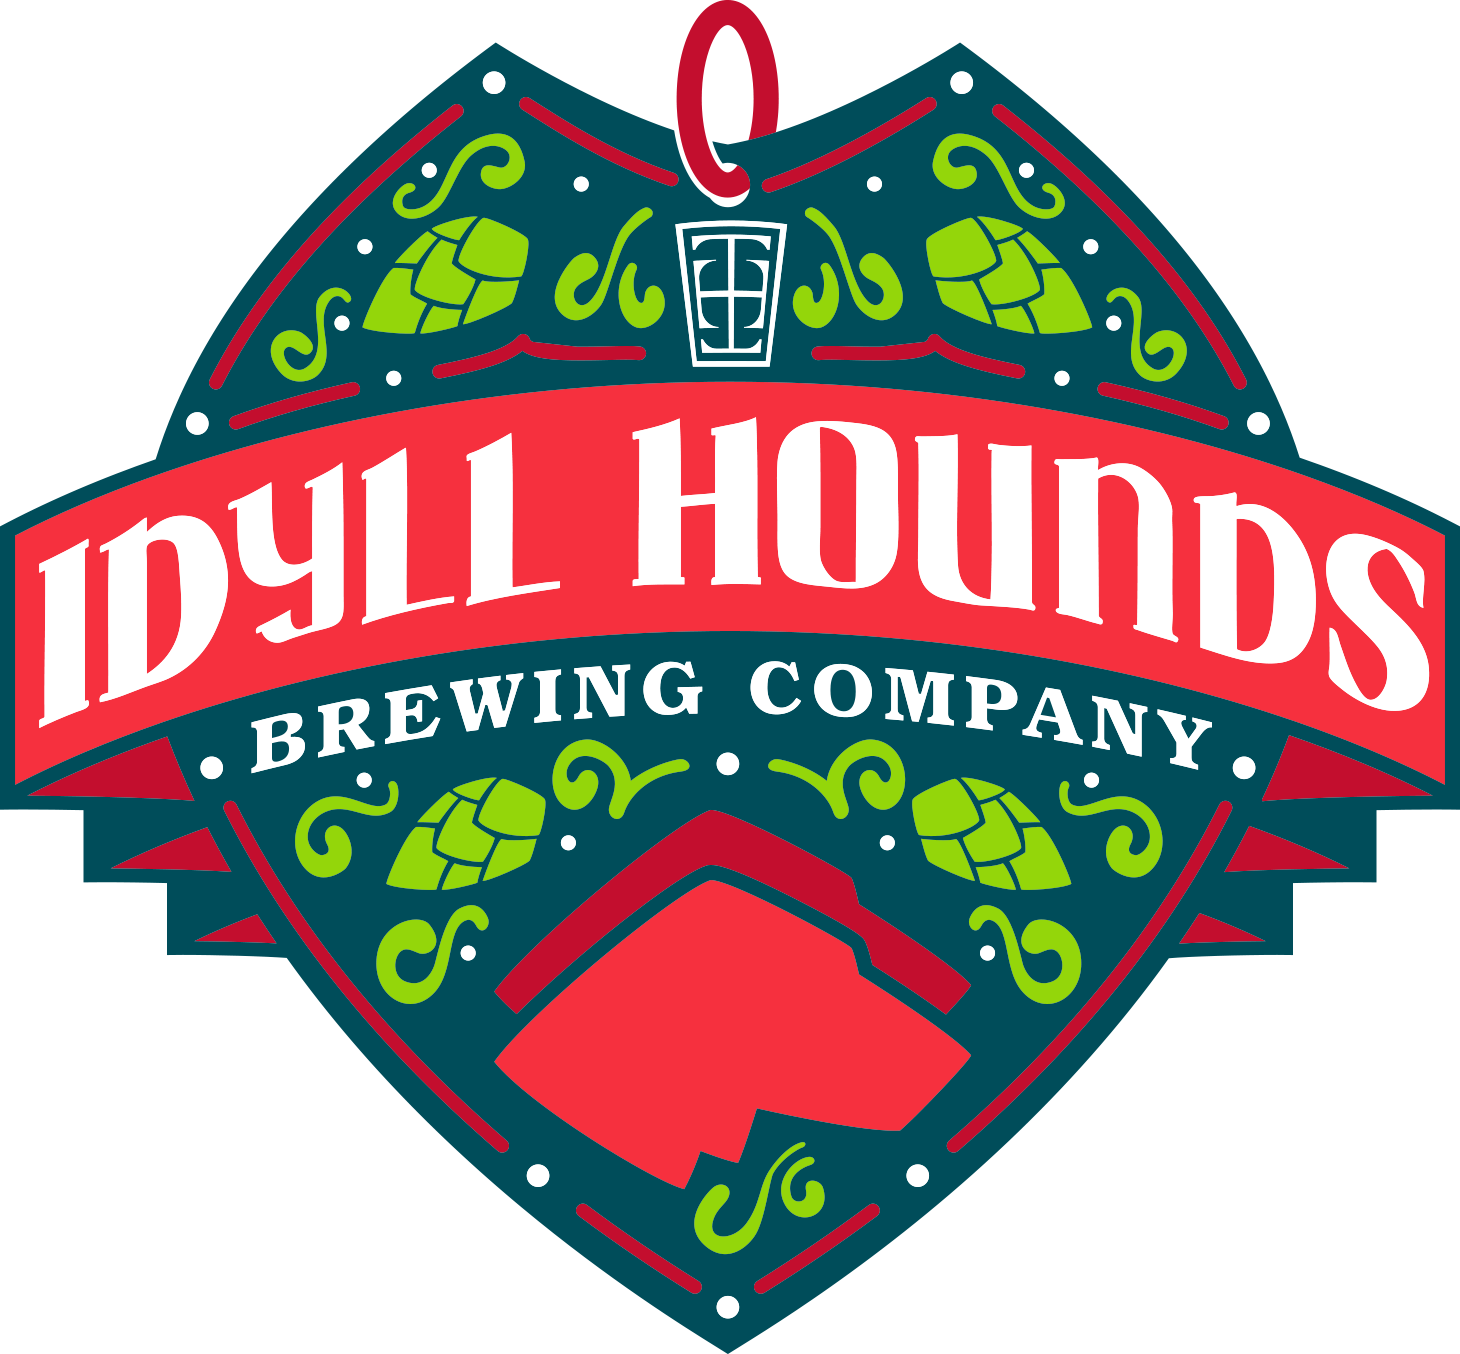 Prague S Pub And Beer Guide Idyll Hounds Brewing Company